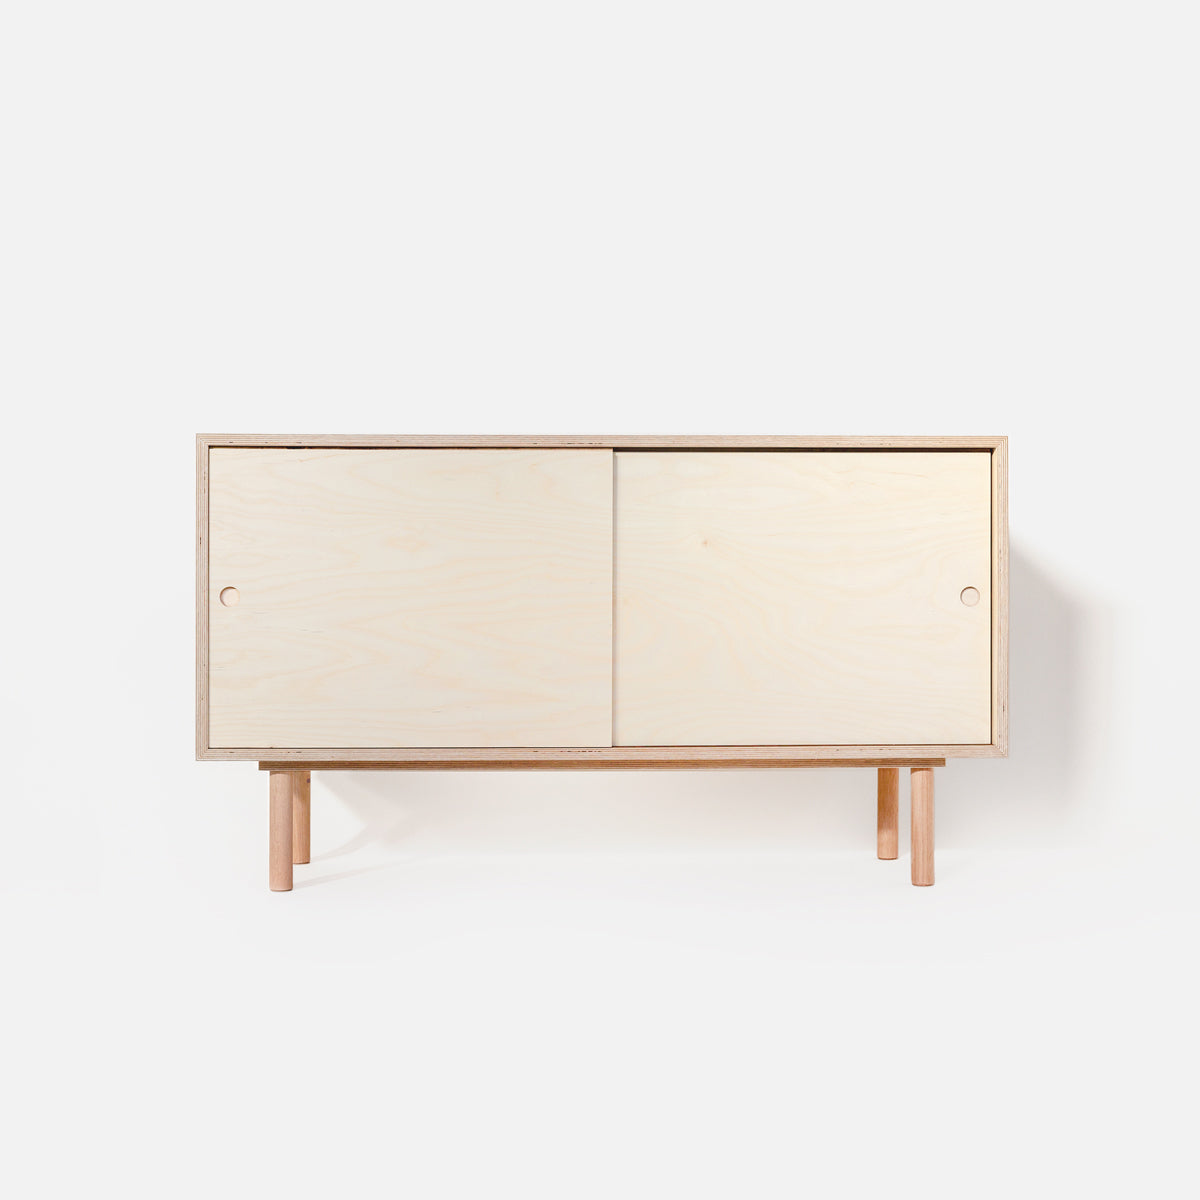 Minimalist Furniture by Plyroom designed and made by furniture makers in Melbourne